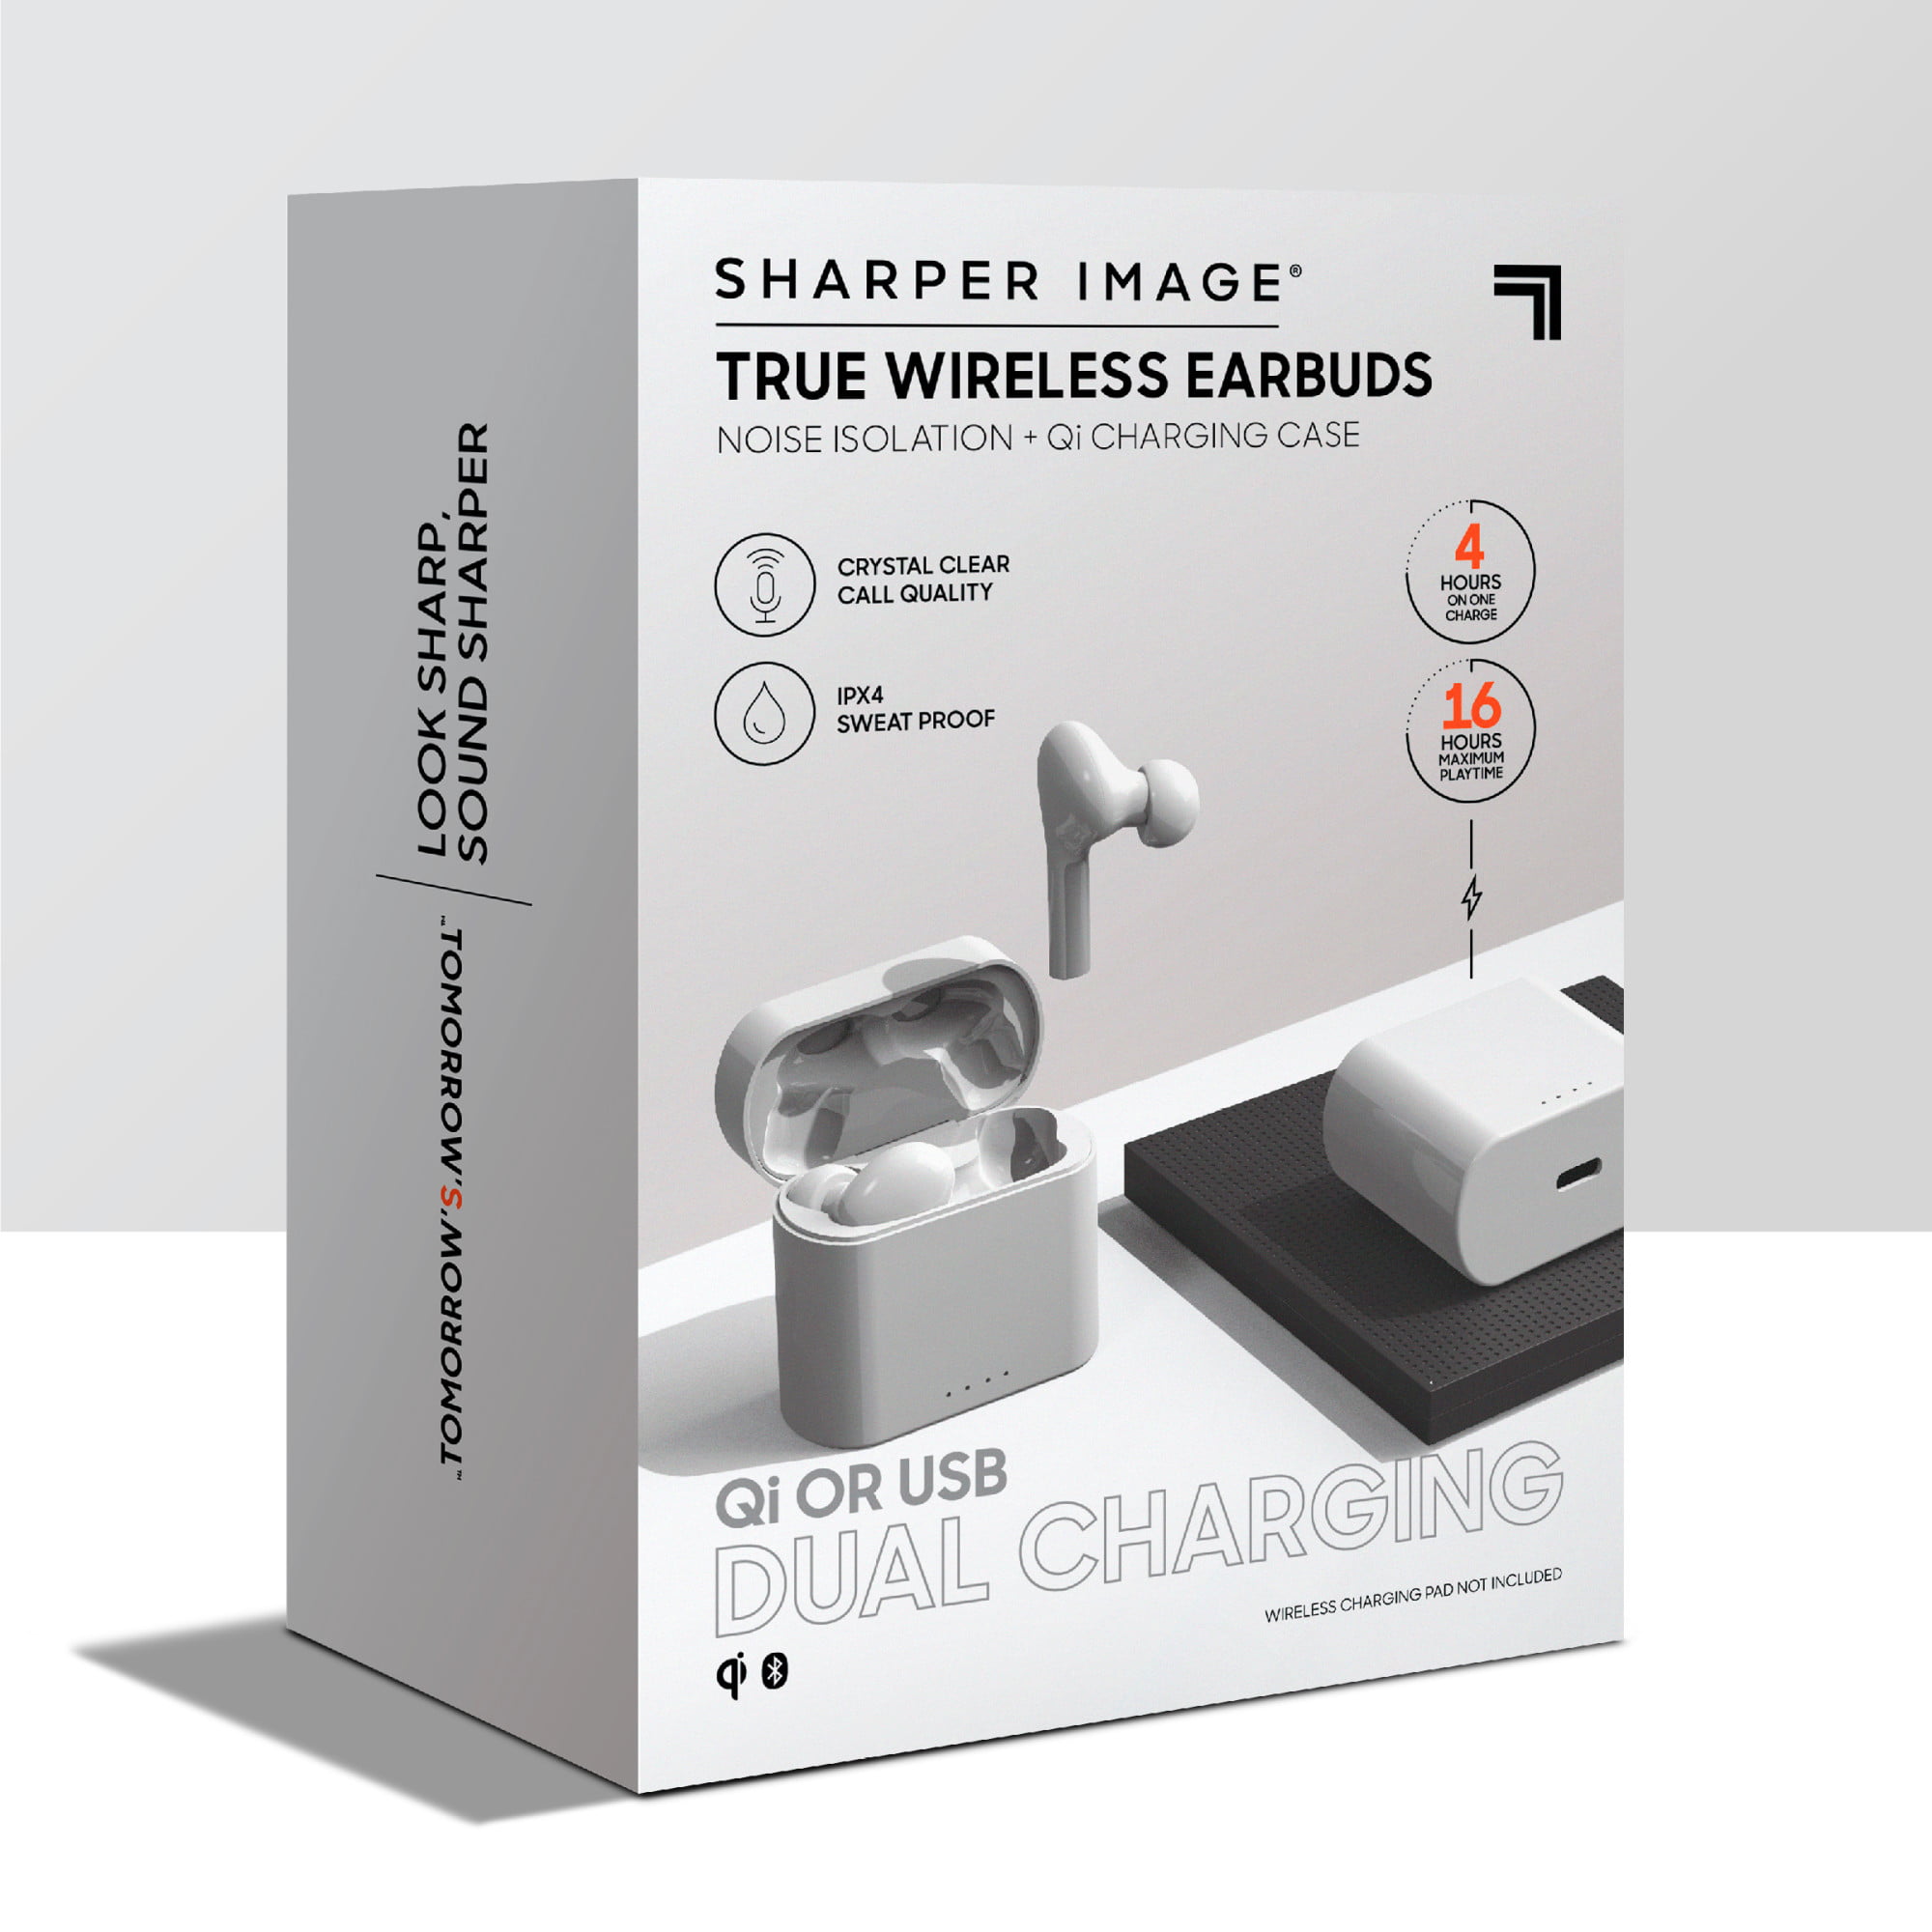 Wireless earbuds with Qi charging & noise cancellation